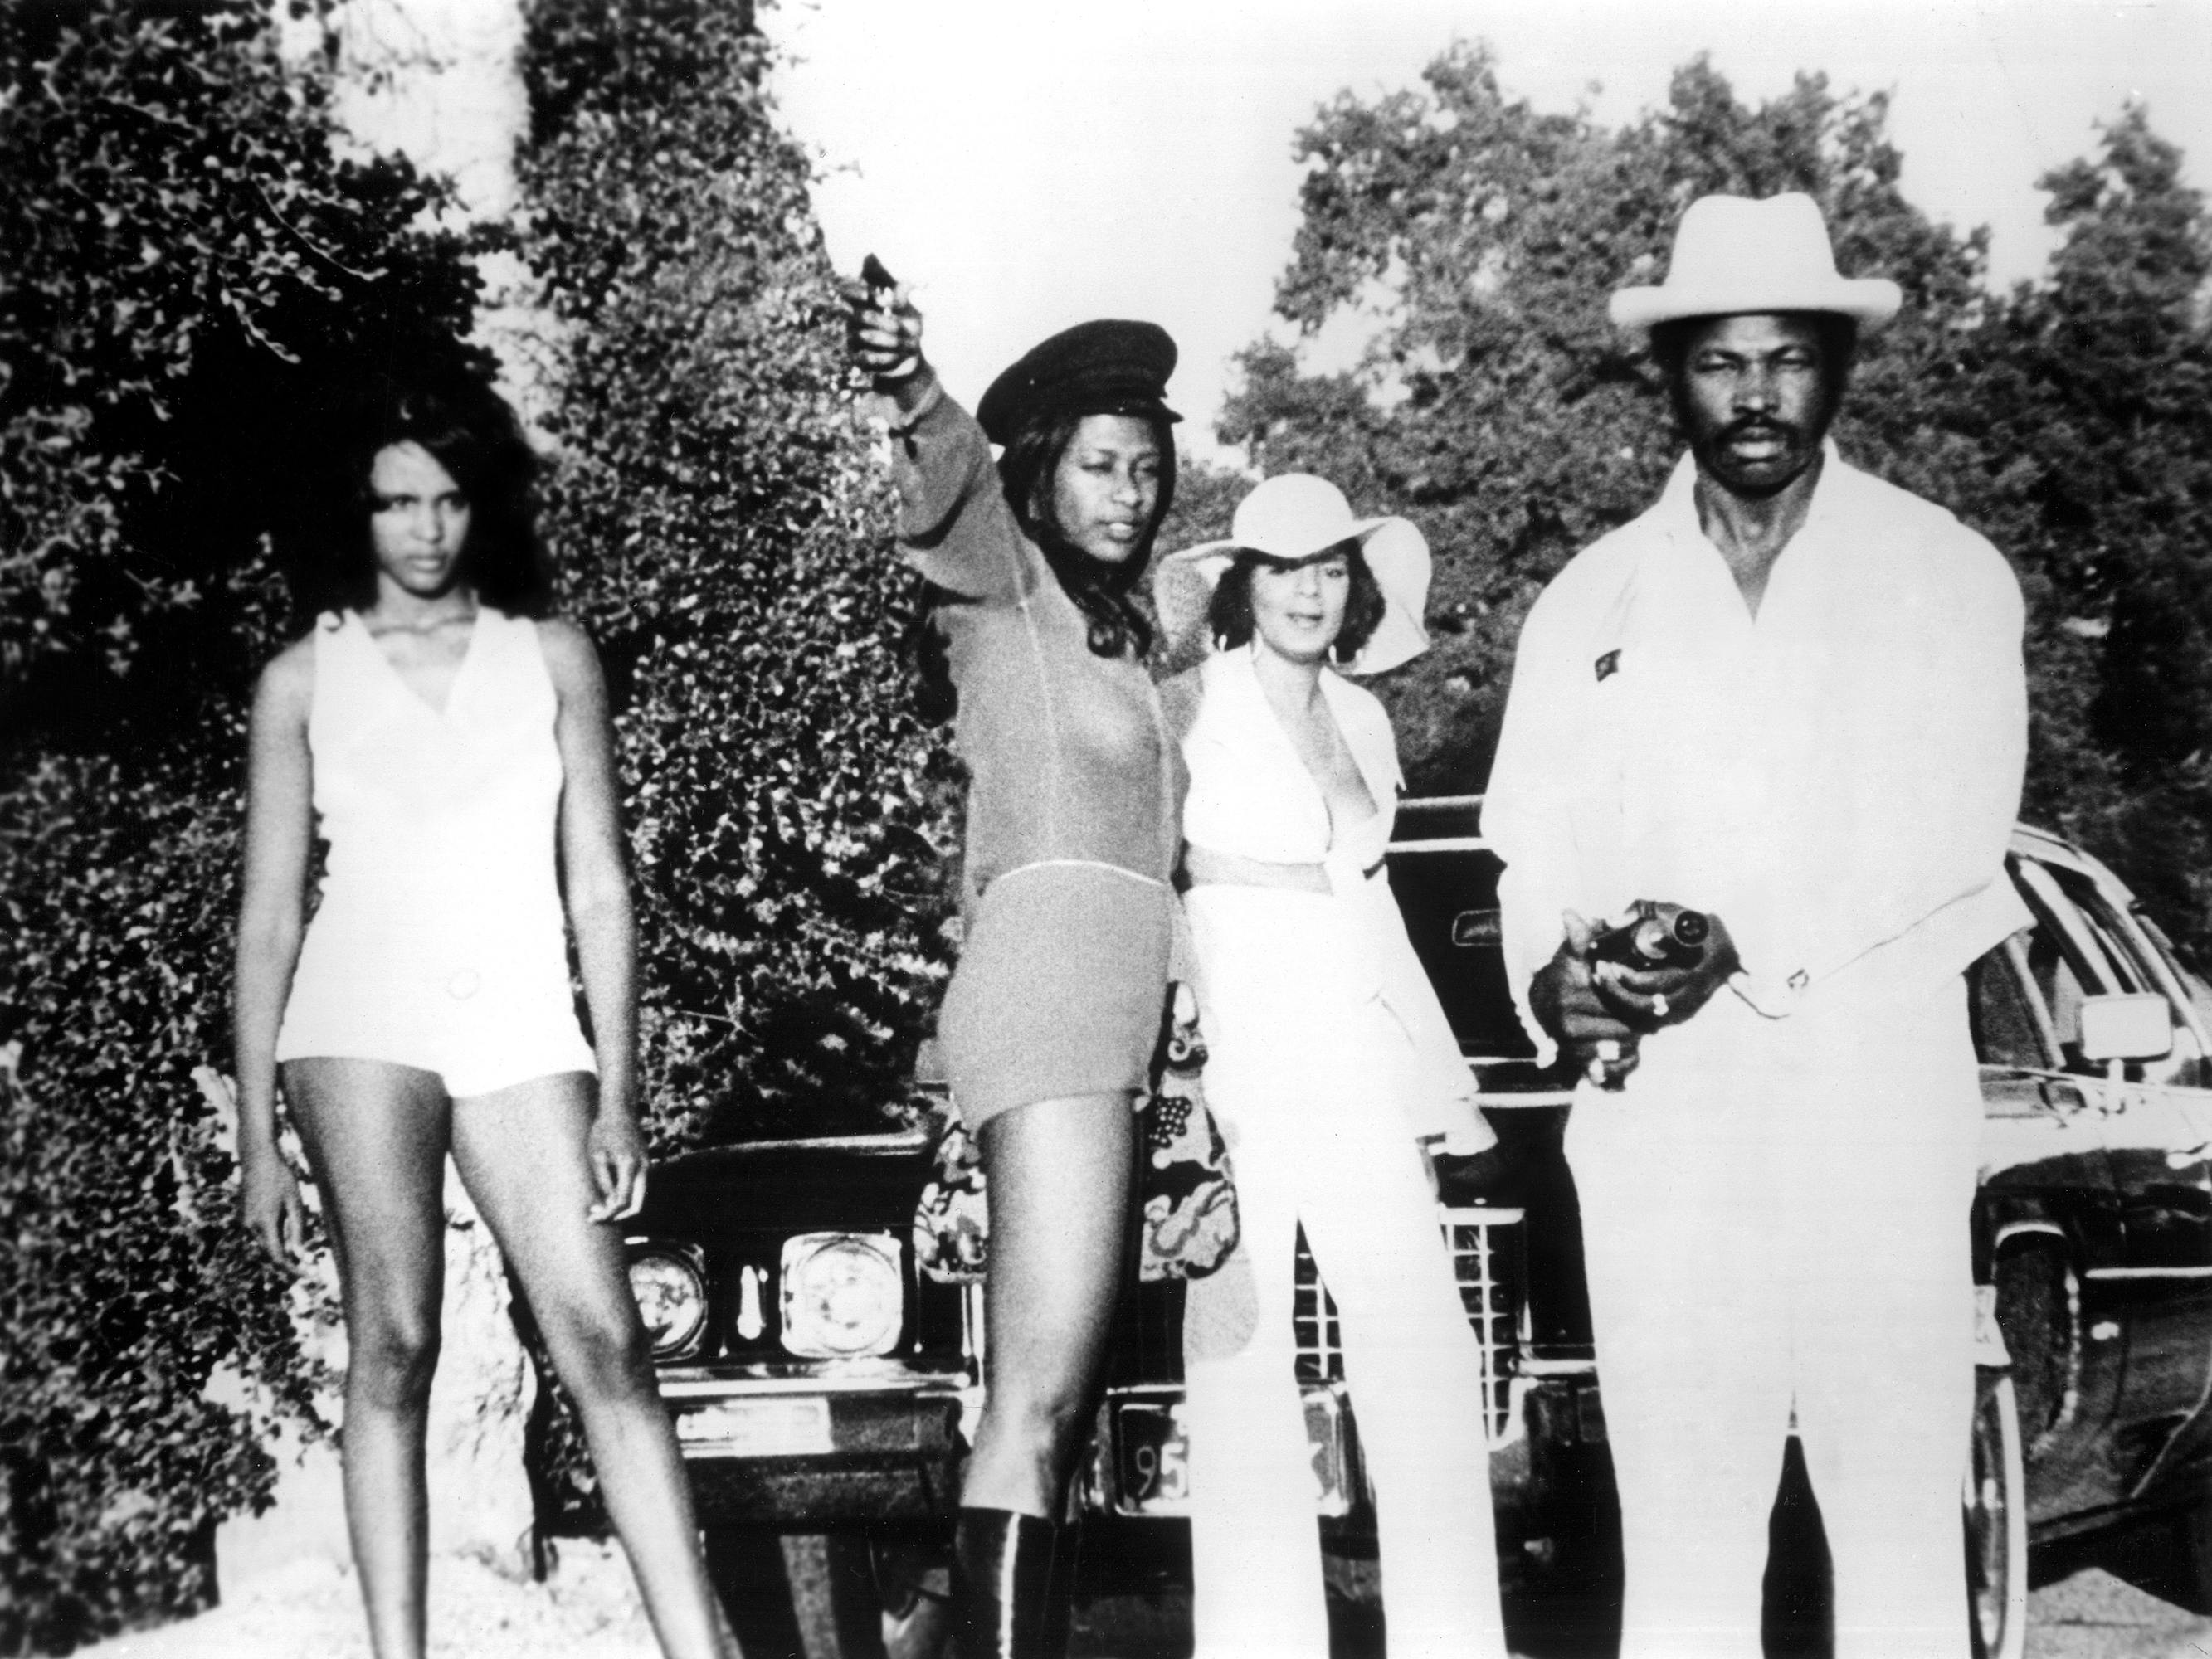 Dolemite (Rudy Ray Moore) and the Dolemite callgirls stand outside a slick black car.